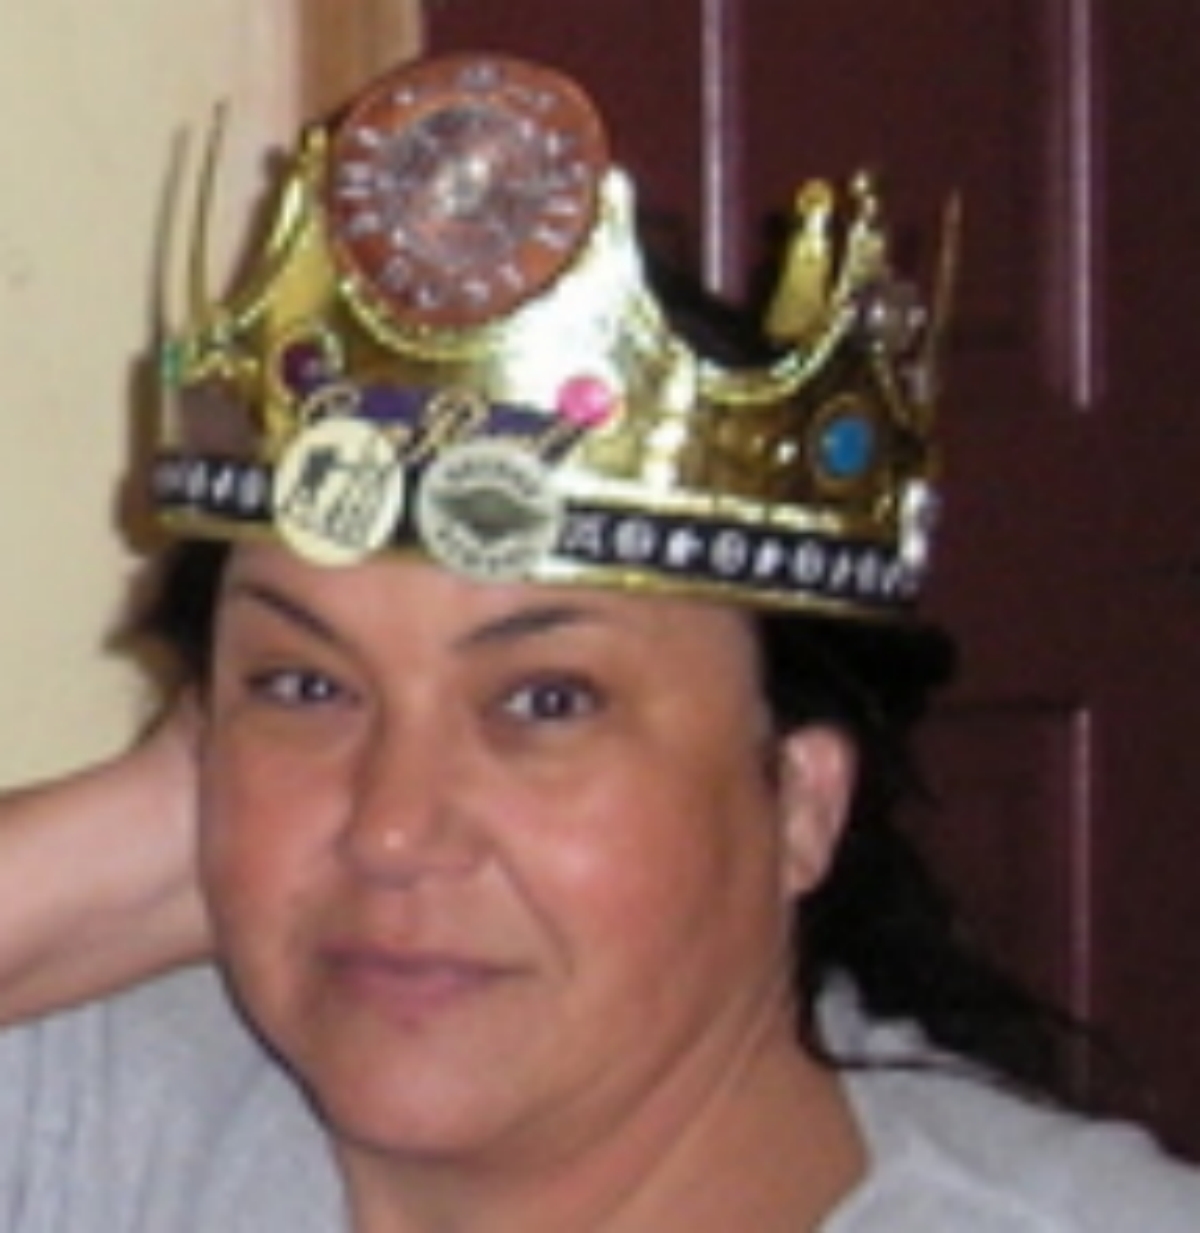 Photo of Paulette wearing the ROTM crown